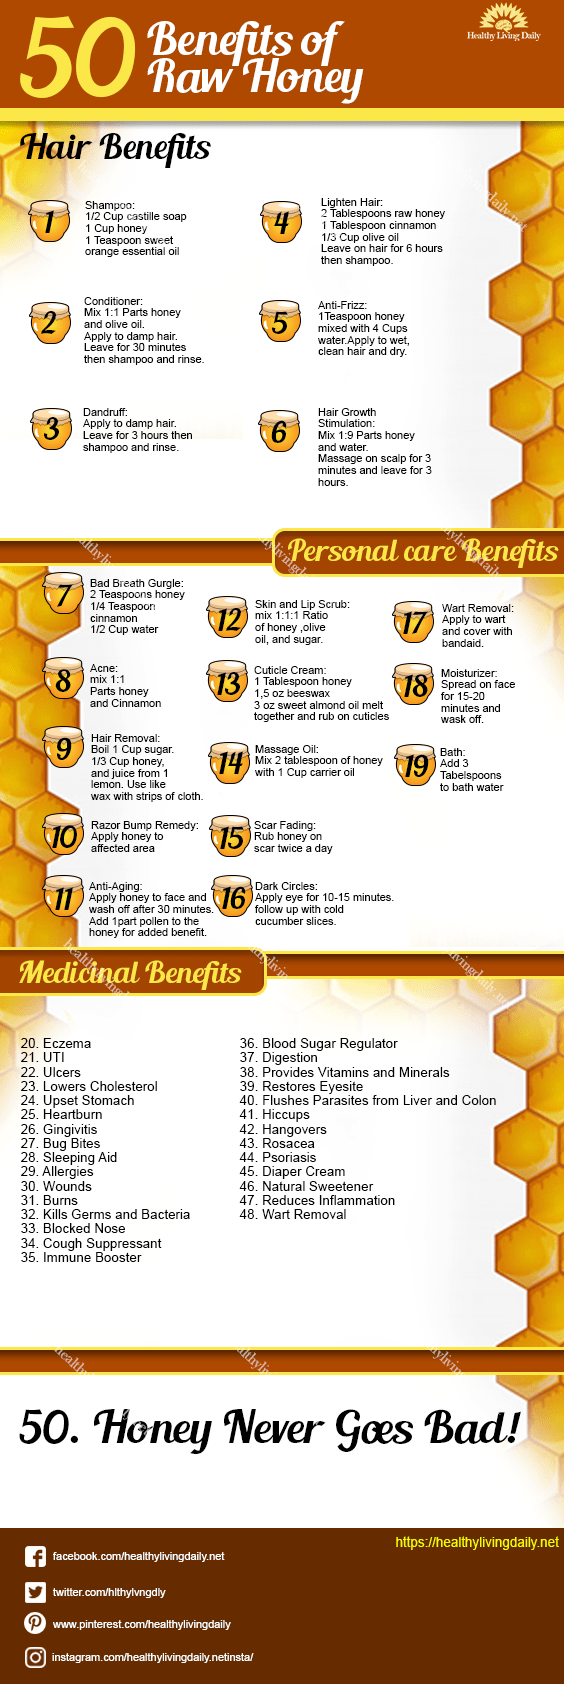 50 Benefits Of Raw Honey Infographic Healthy Living Daily 4036